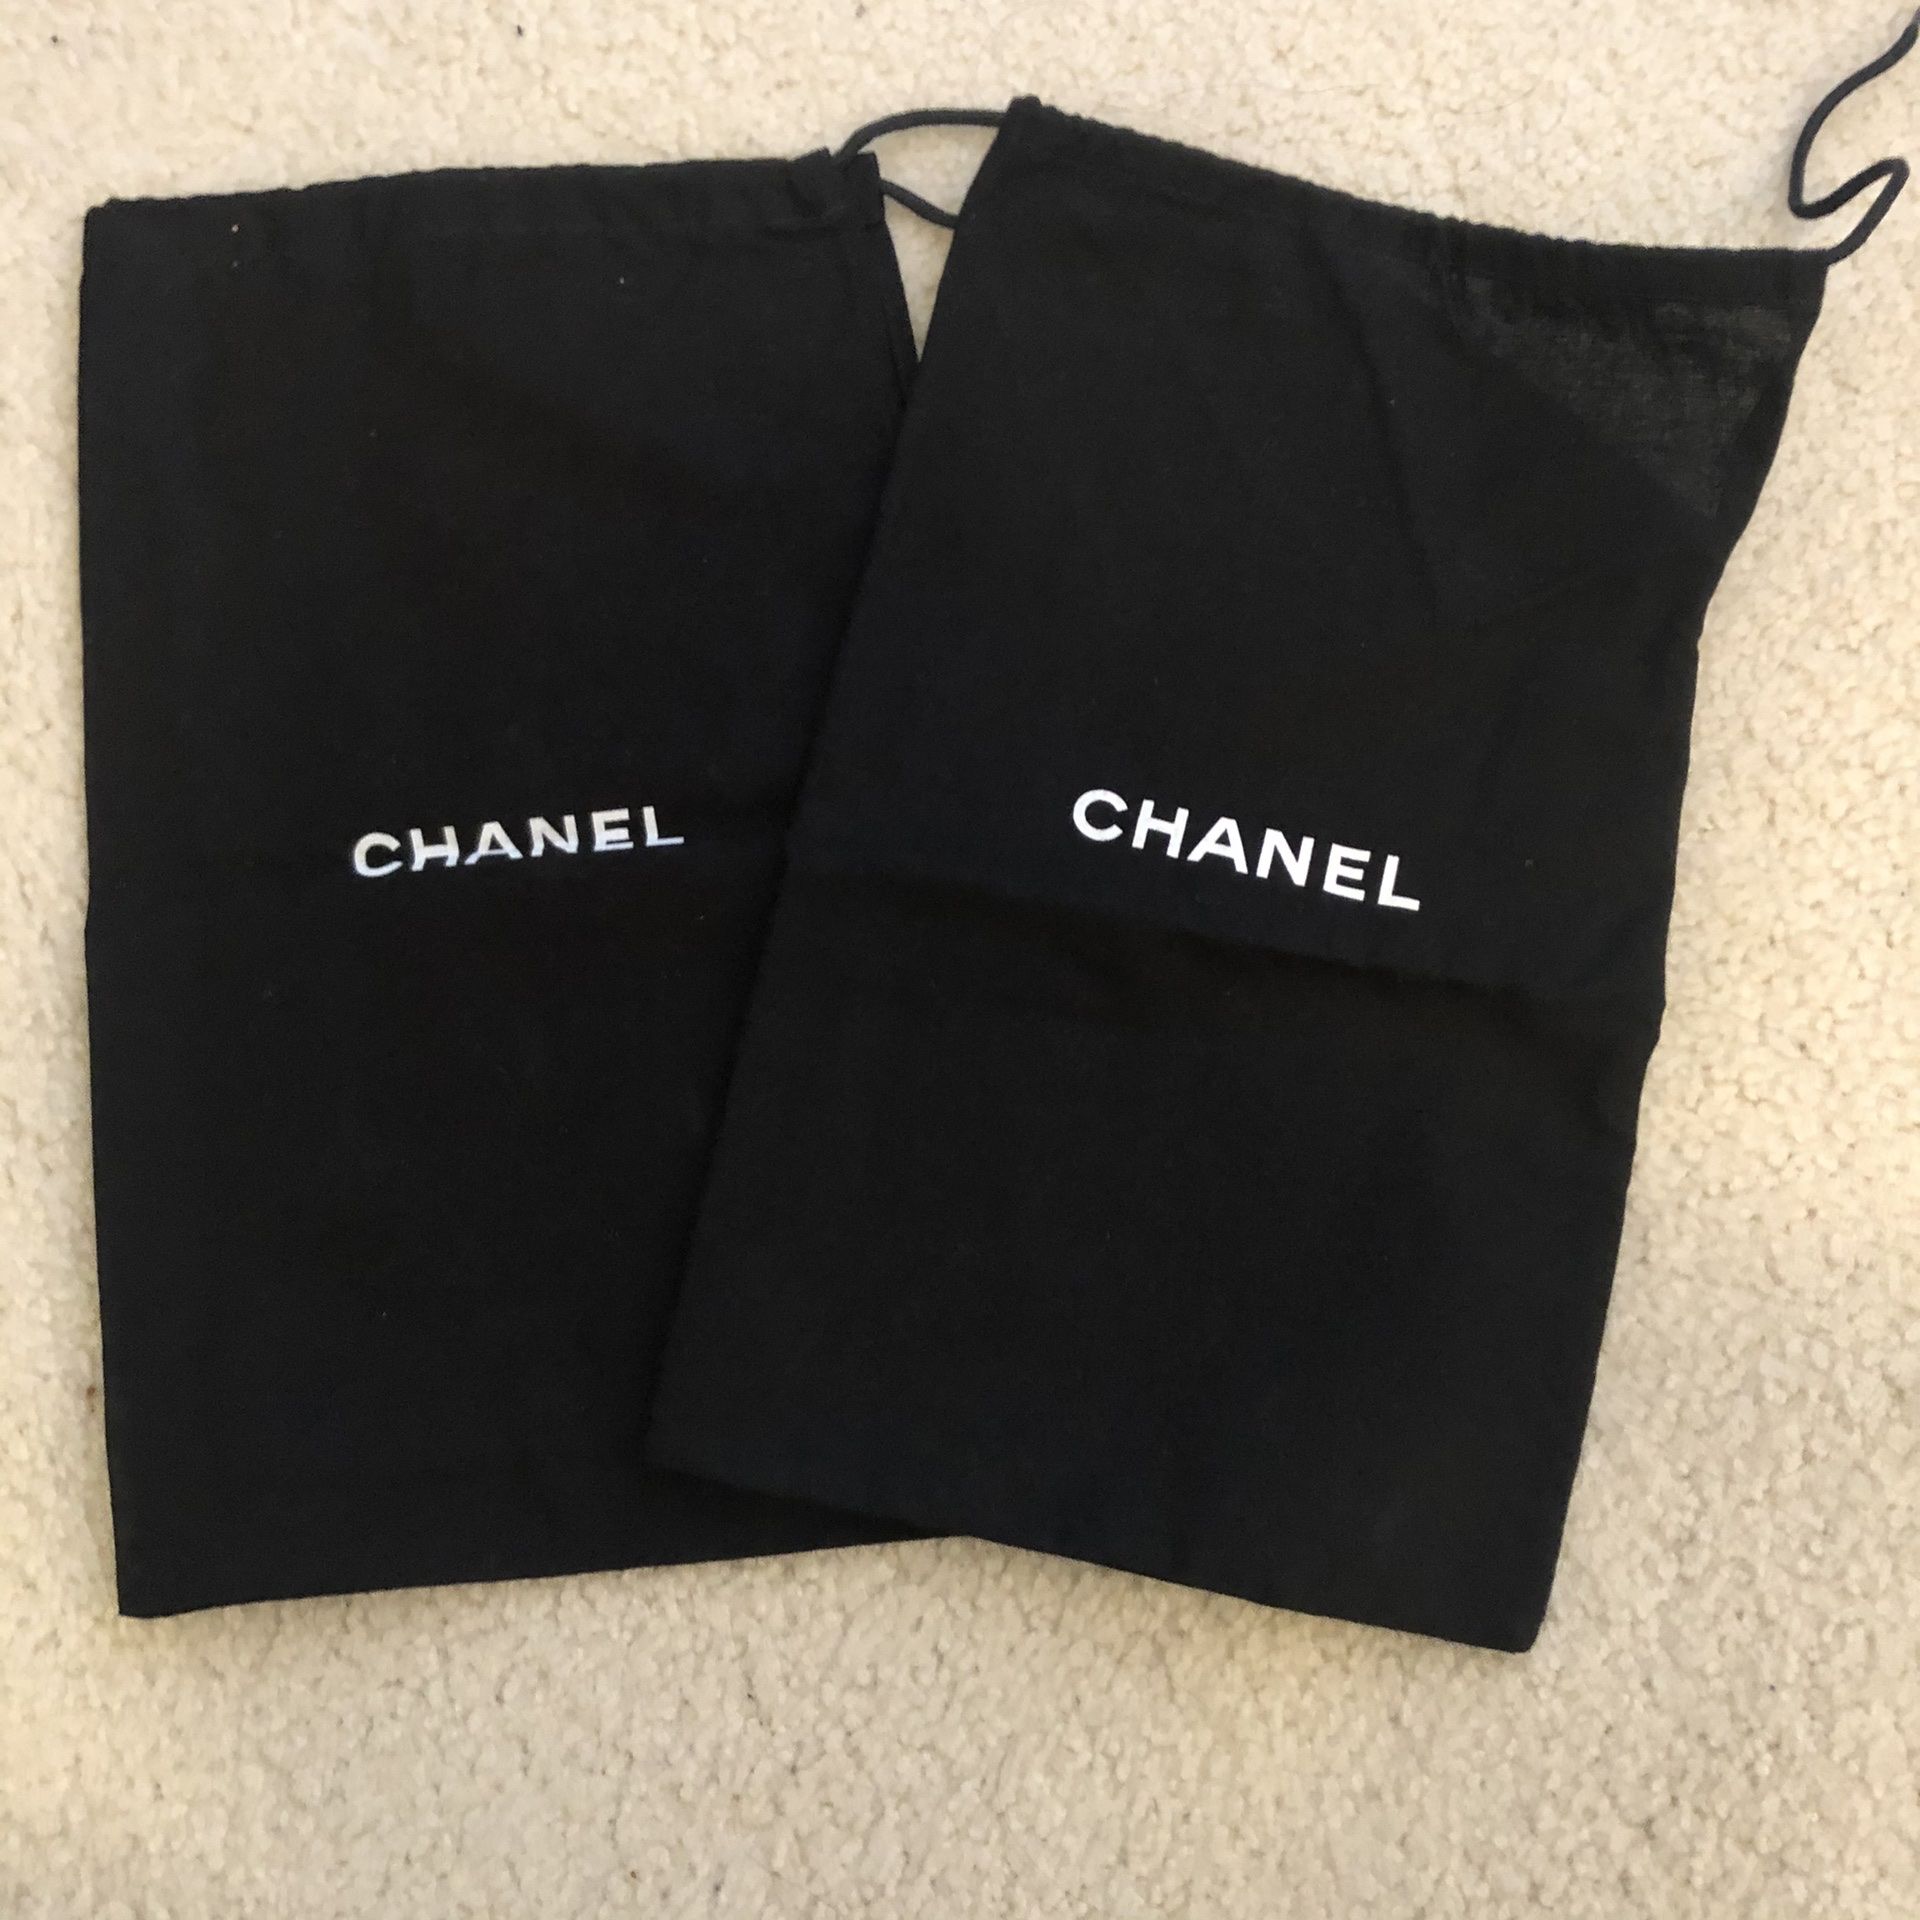 CHANEL Dust Shoes Bag Small Purse 12.5x8”